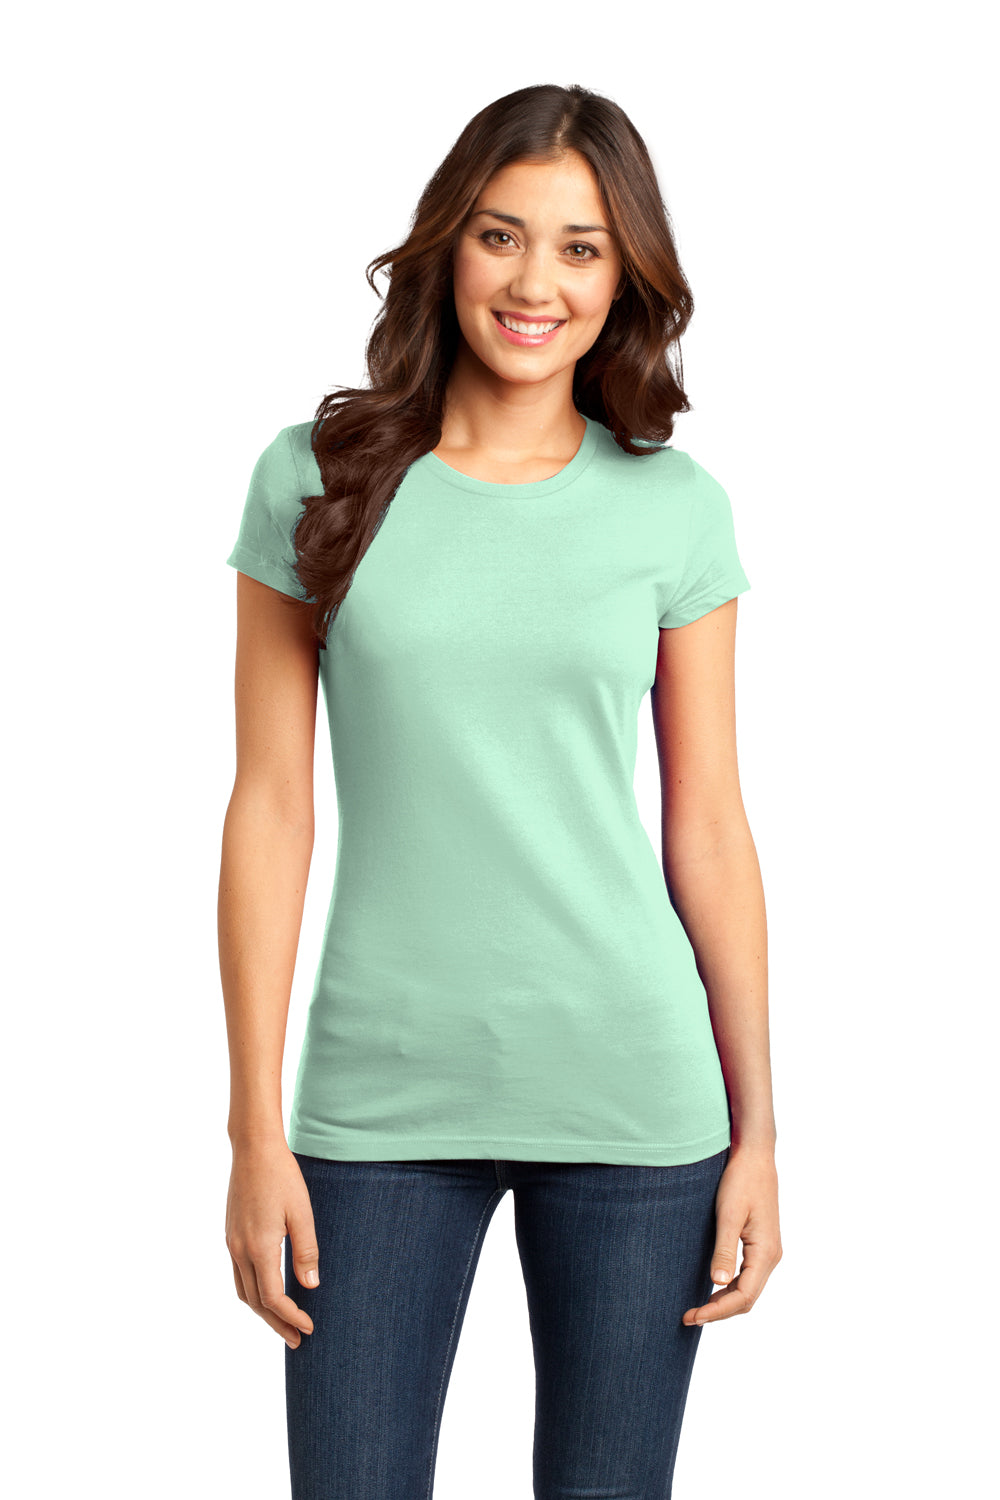 District DT6001 Womens Very Important Short Sleeve Crewneck T-Shirt Mint Green Front